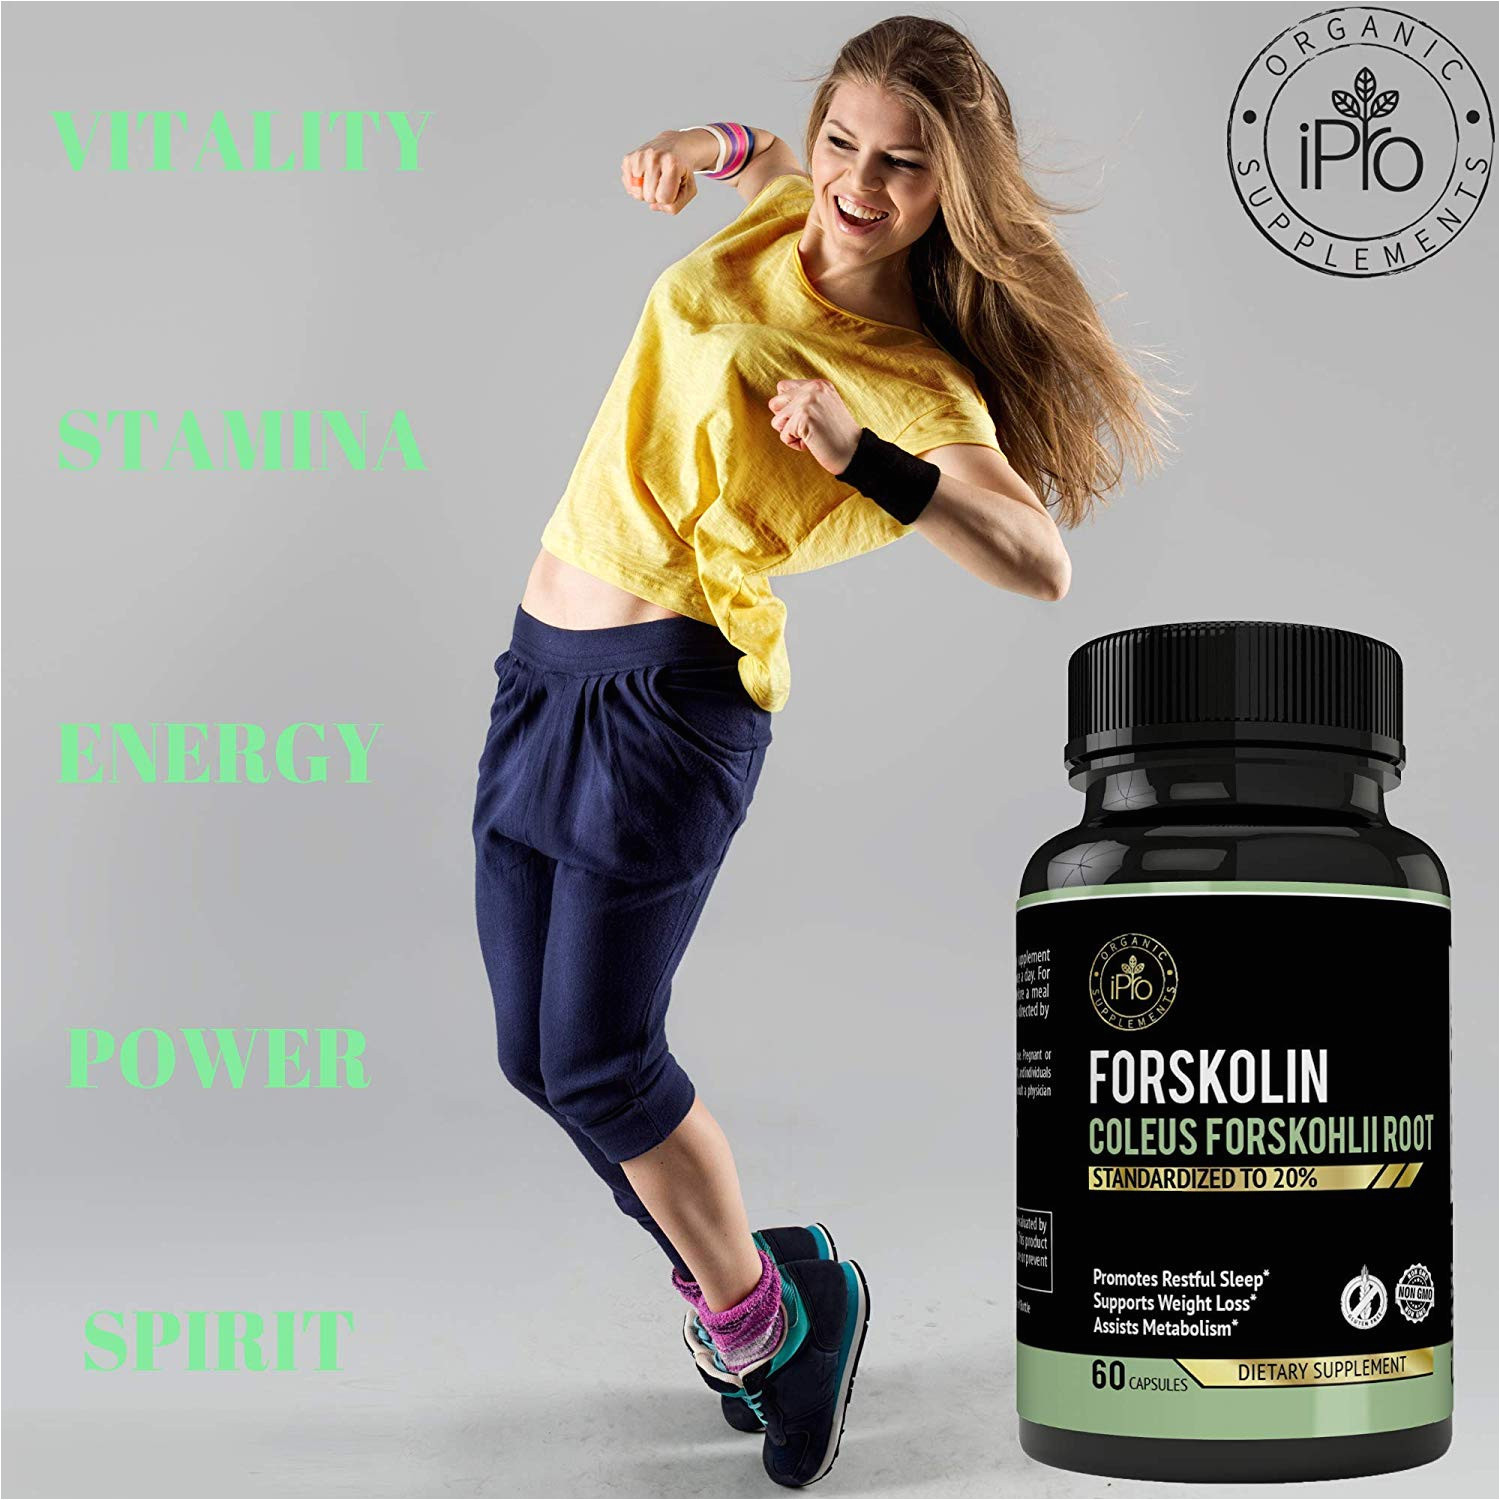 amazon com ipro organic supplement forskolin coleus forskonlil root extract 60 capsules 250mg standarized to 20 for rapid slim tone weight loss